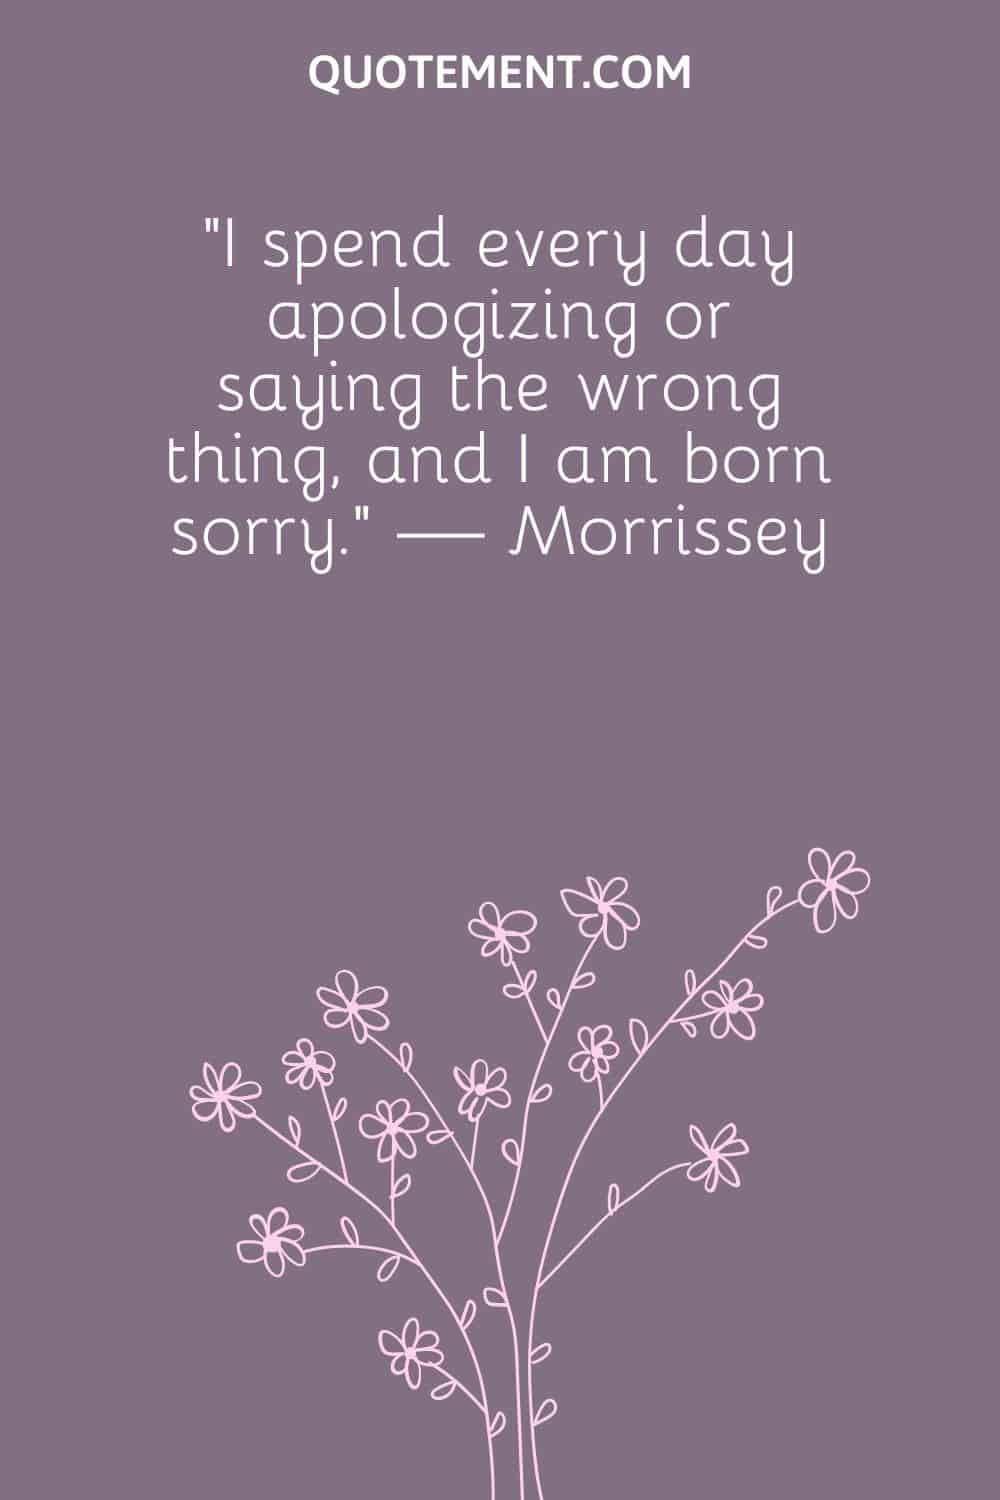 “I spend every day apologizing or saying the wrong thing, and I am born sorry.” — Morrissey